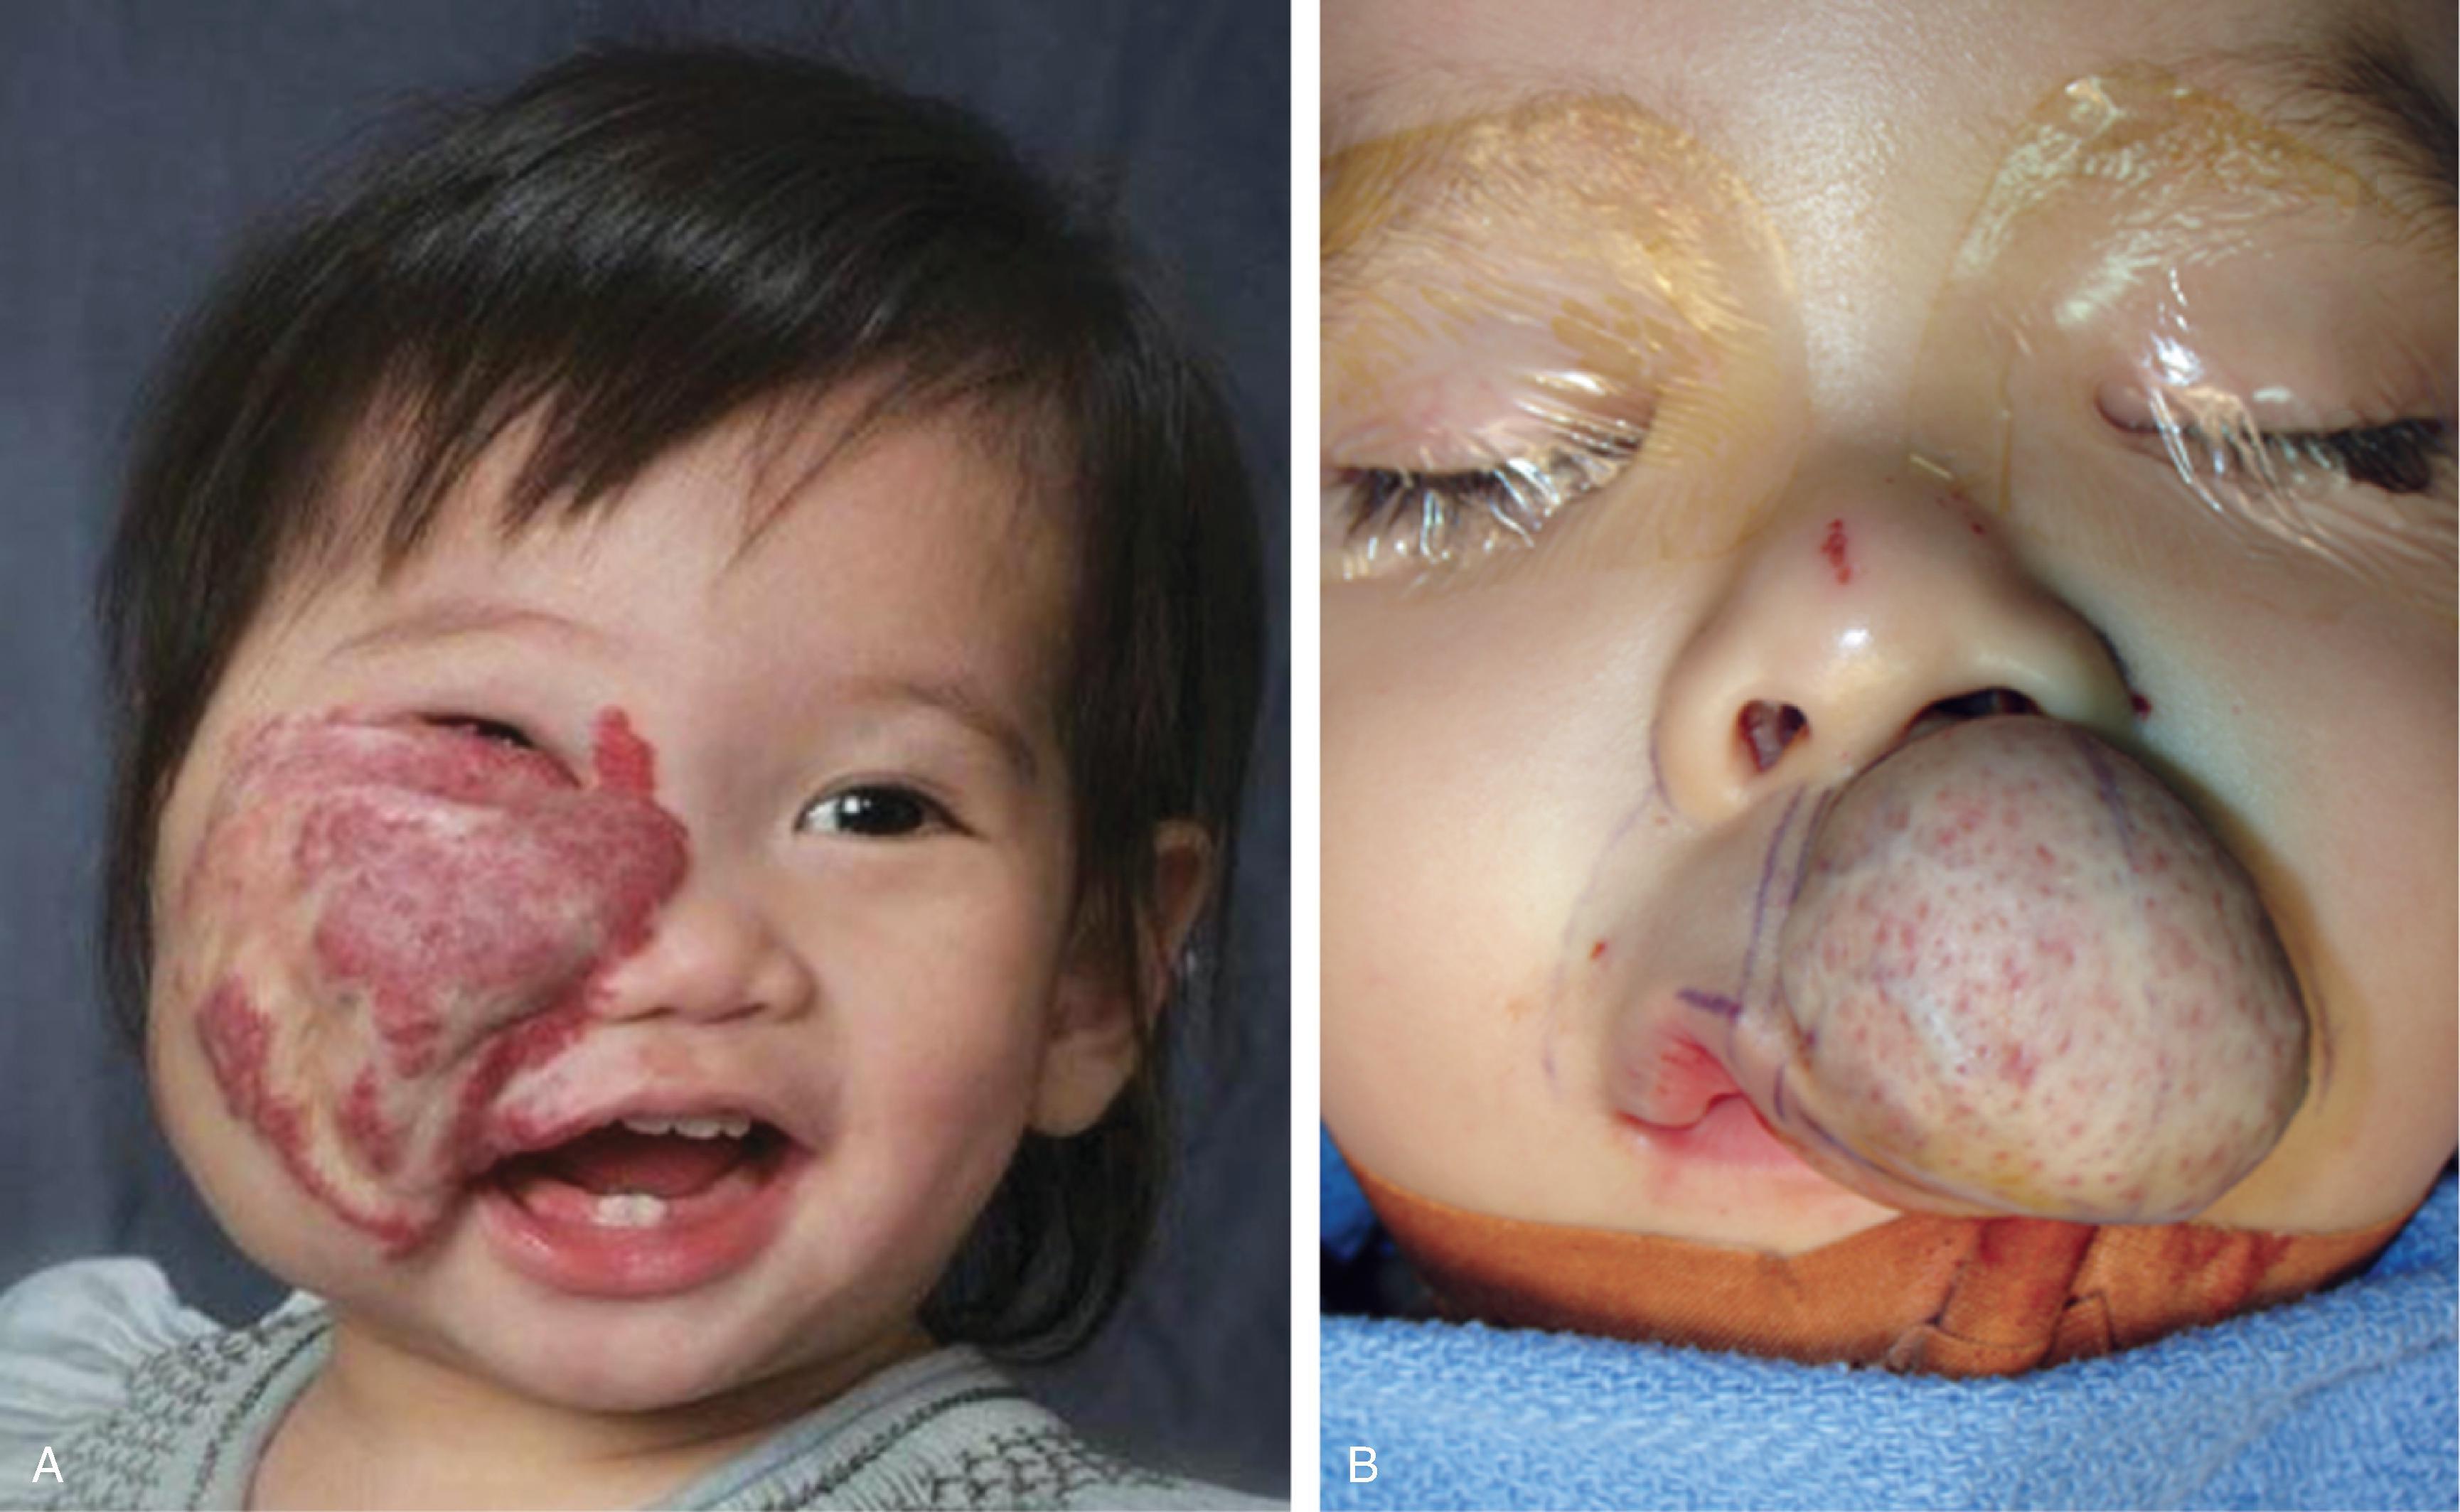 FIG. 28.2, Examples of involuting segmental ( A ) and fully involuted focal ( B ) infantile hemangiomas. Note the residual telangiectasias, anetoderma, fibrofatty residual mass effect, and textural changes.